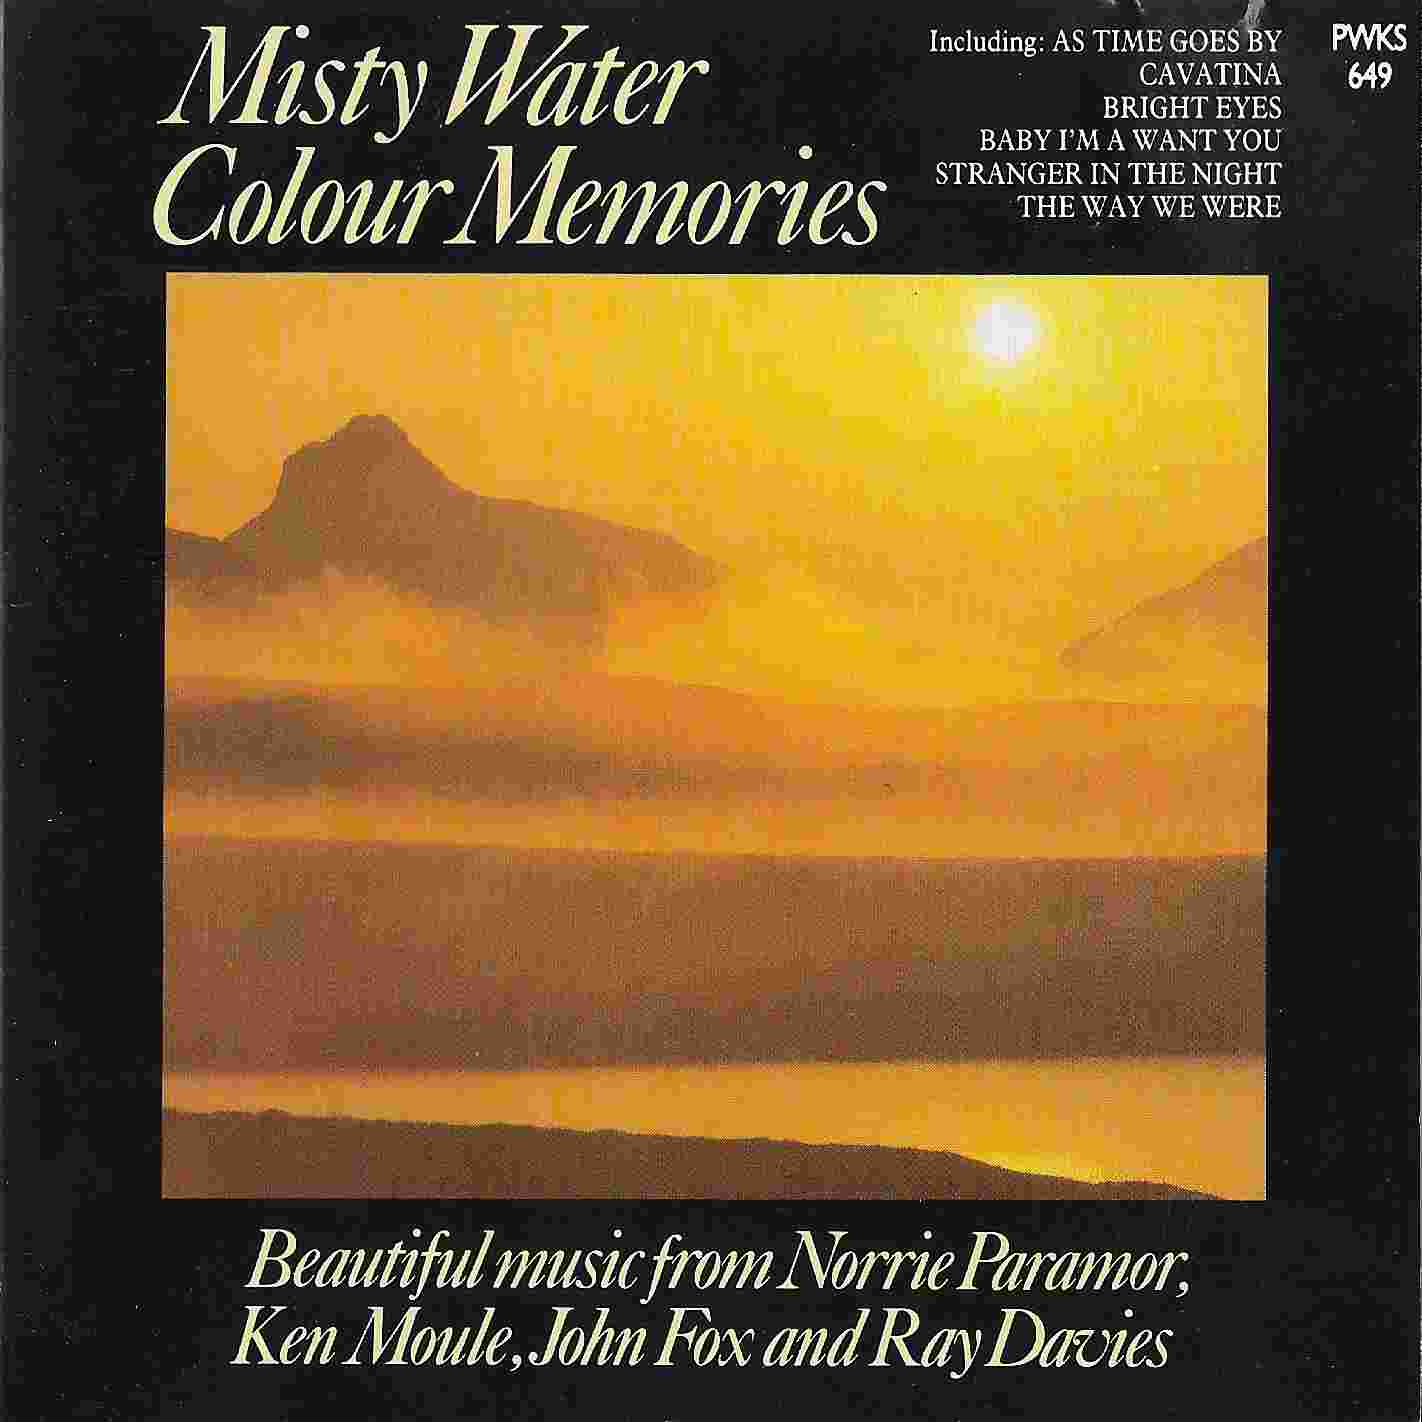 Picture of Misty water - Colour memories by artist Various from the BBC cds - Records and Tapes library